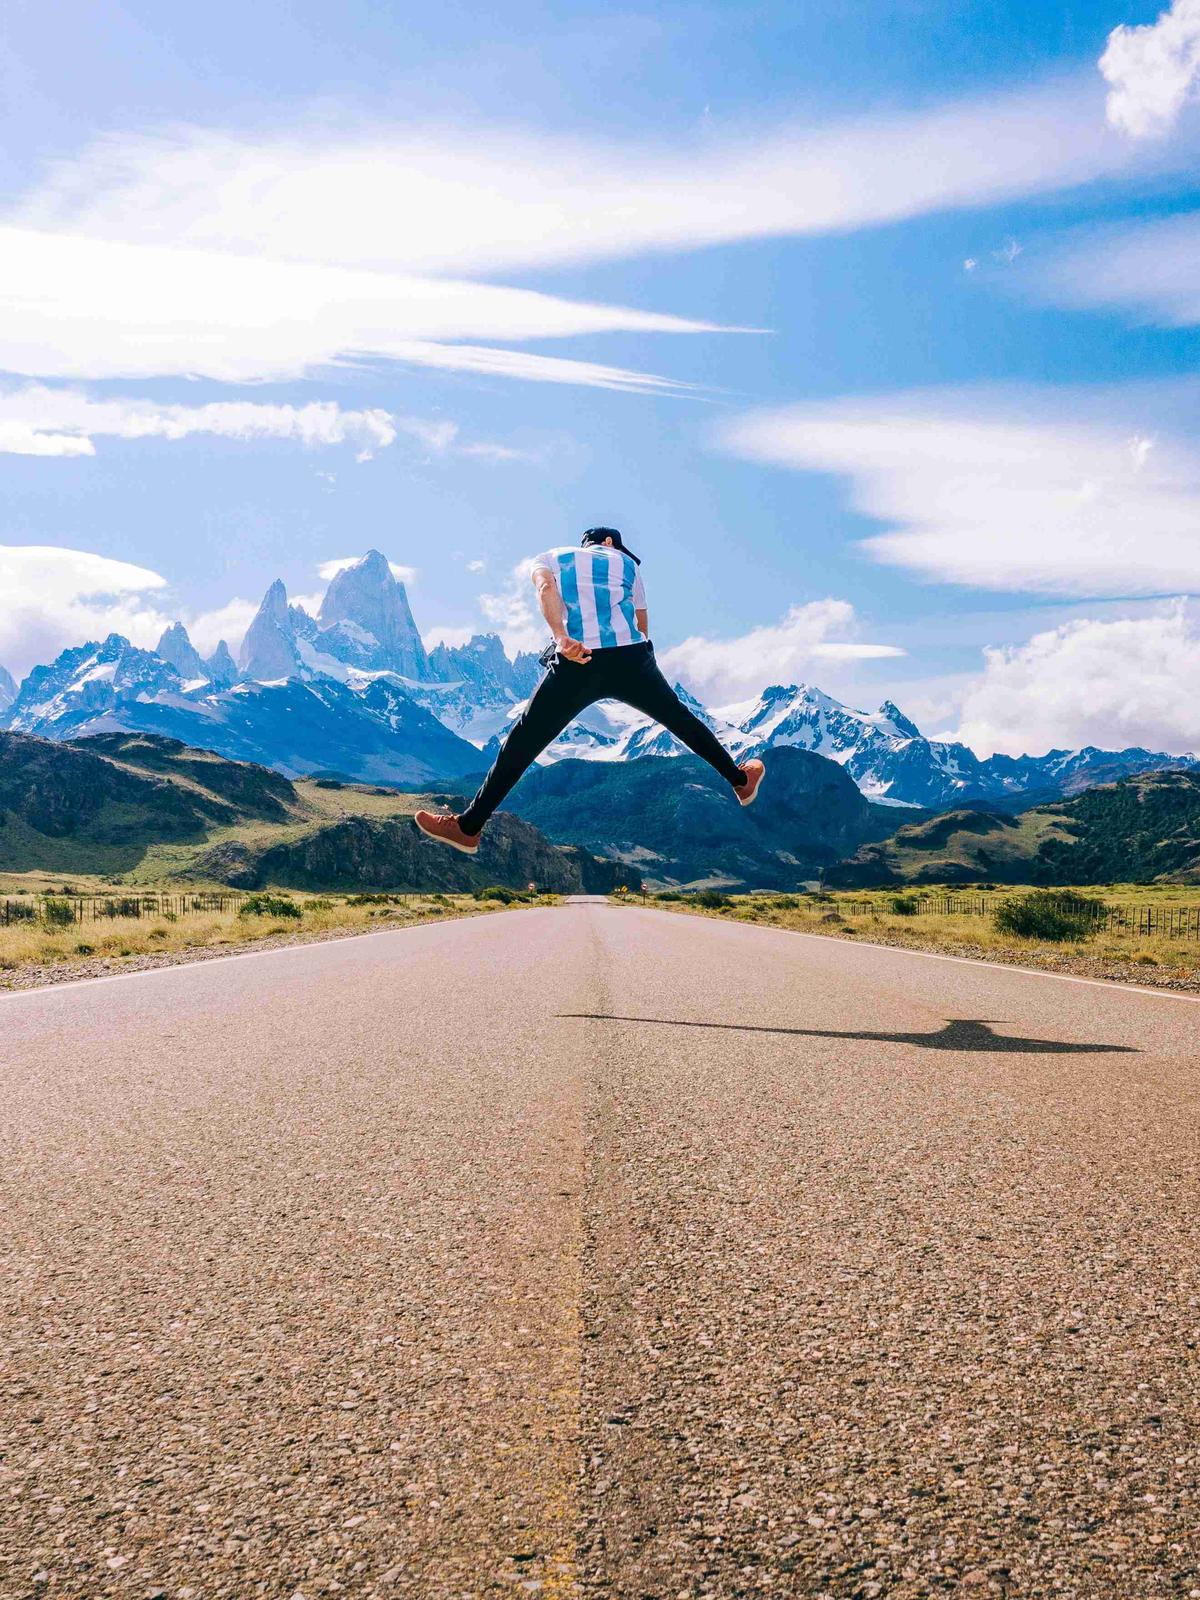 Exuberant Jump on Mountain Road with Snowy Peaks in Background